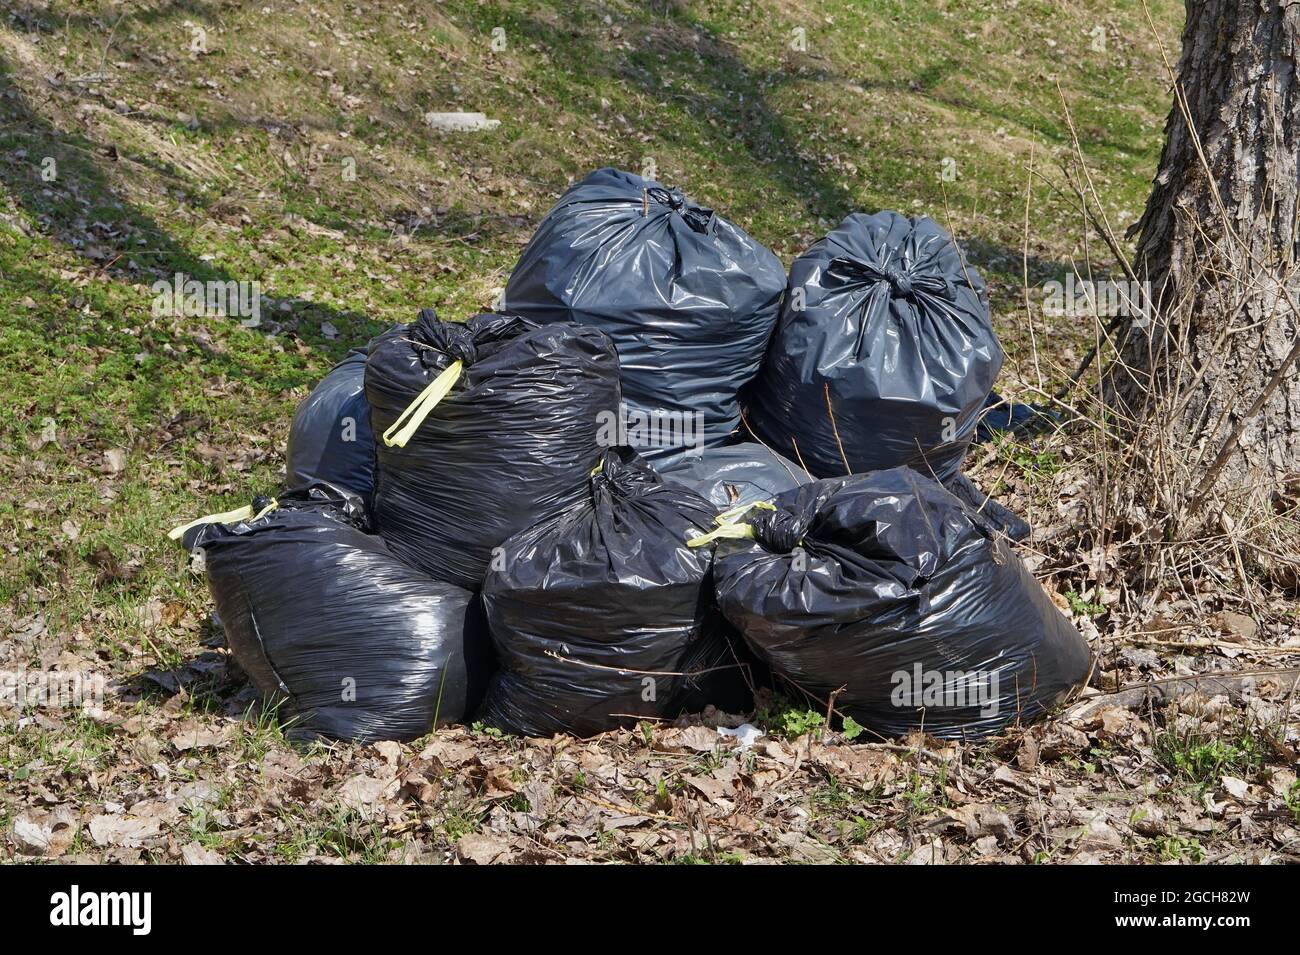 https://c8.alamy.com/comp/2GCH82W/the-big-black-plastic-bags-with-garbage-waste-in-forest-2GCH82W.jpg